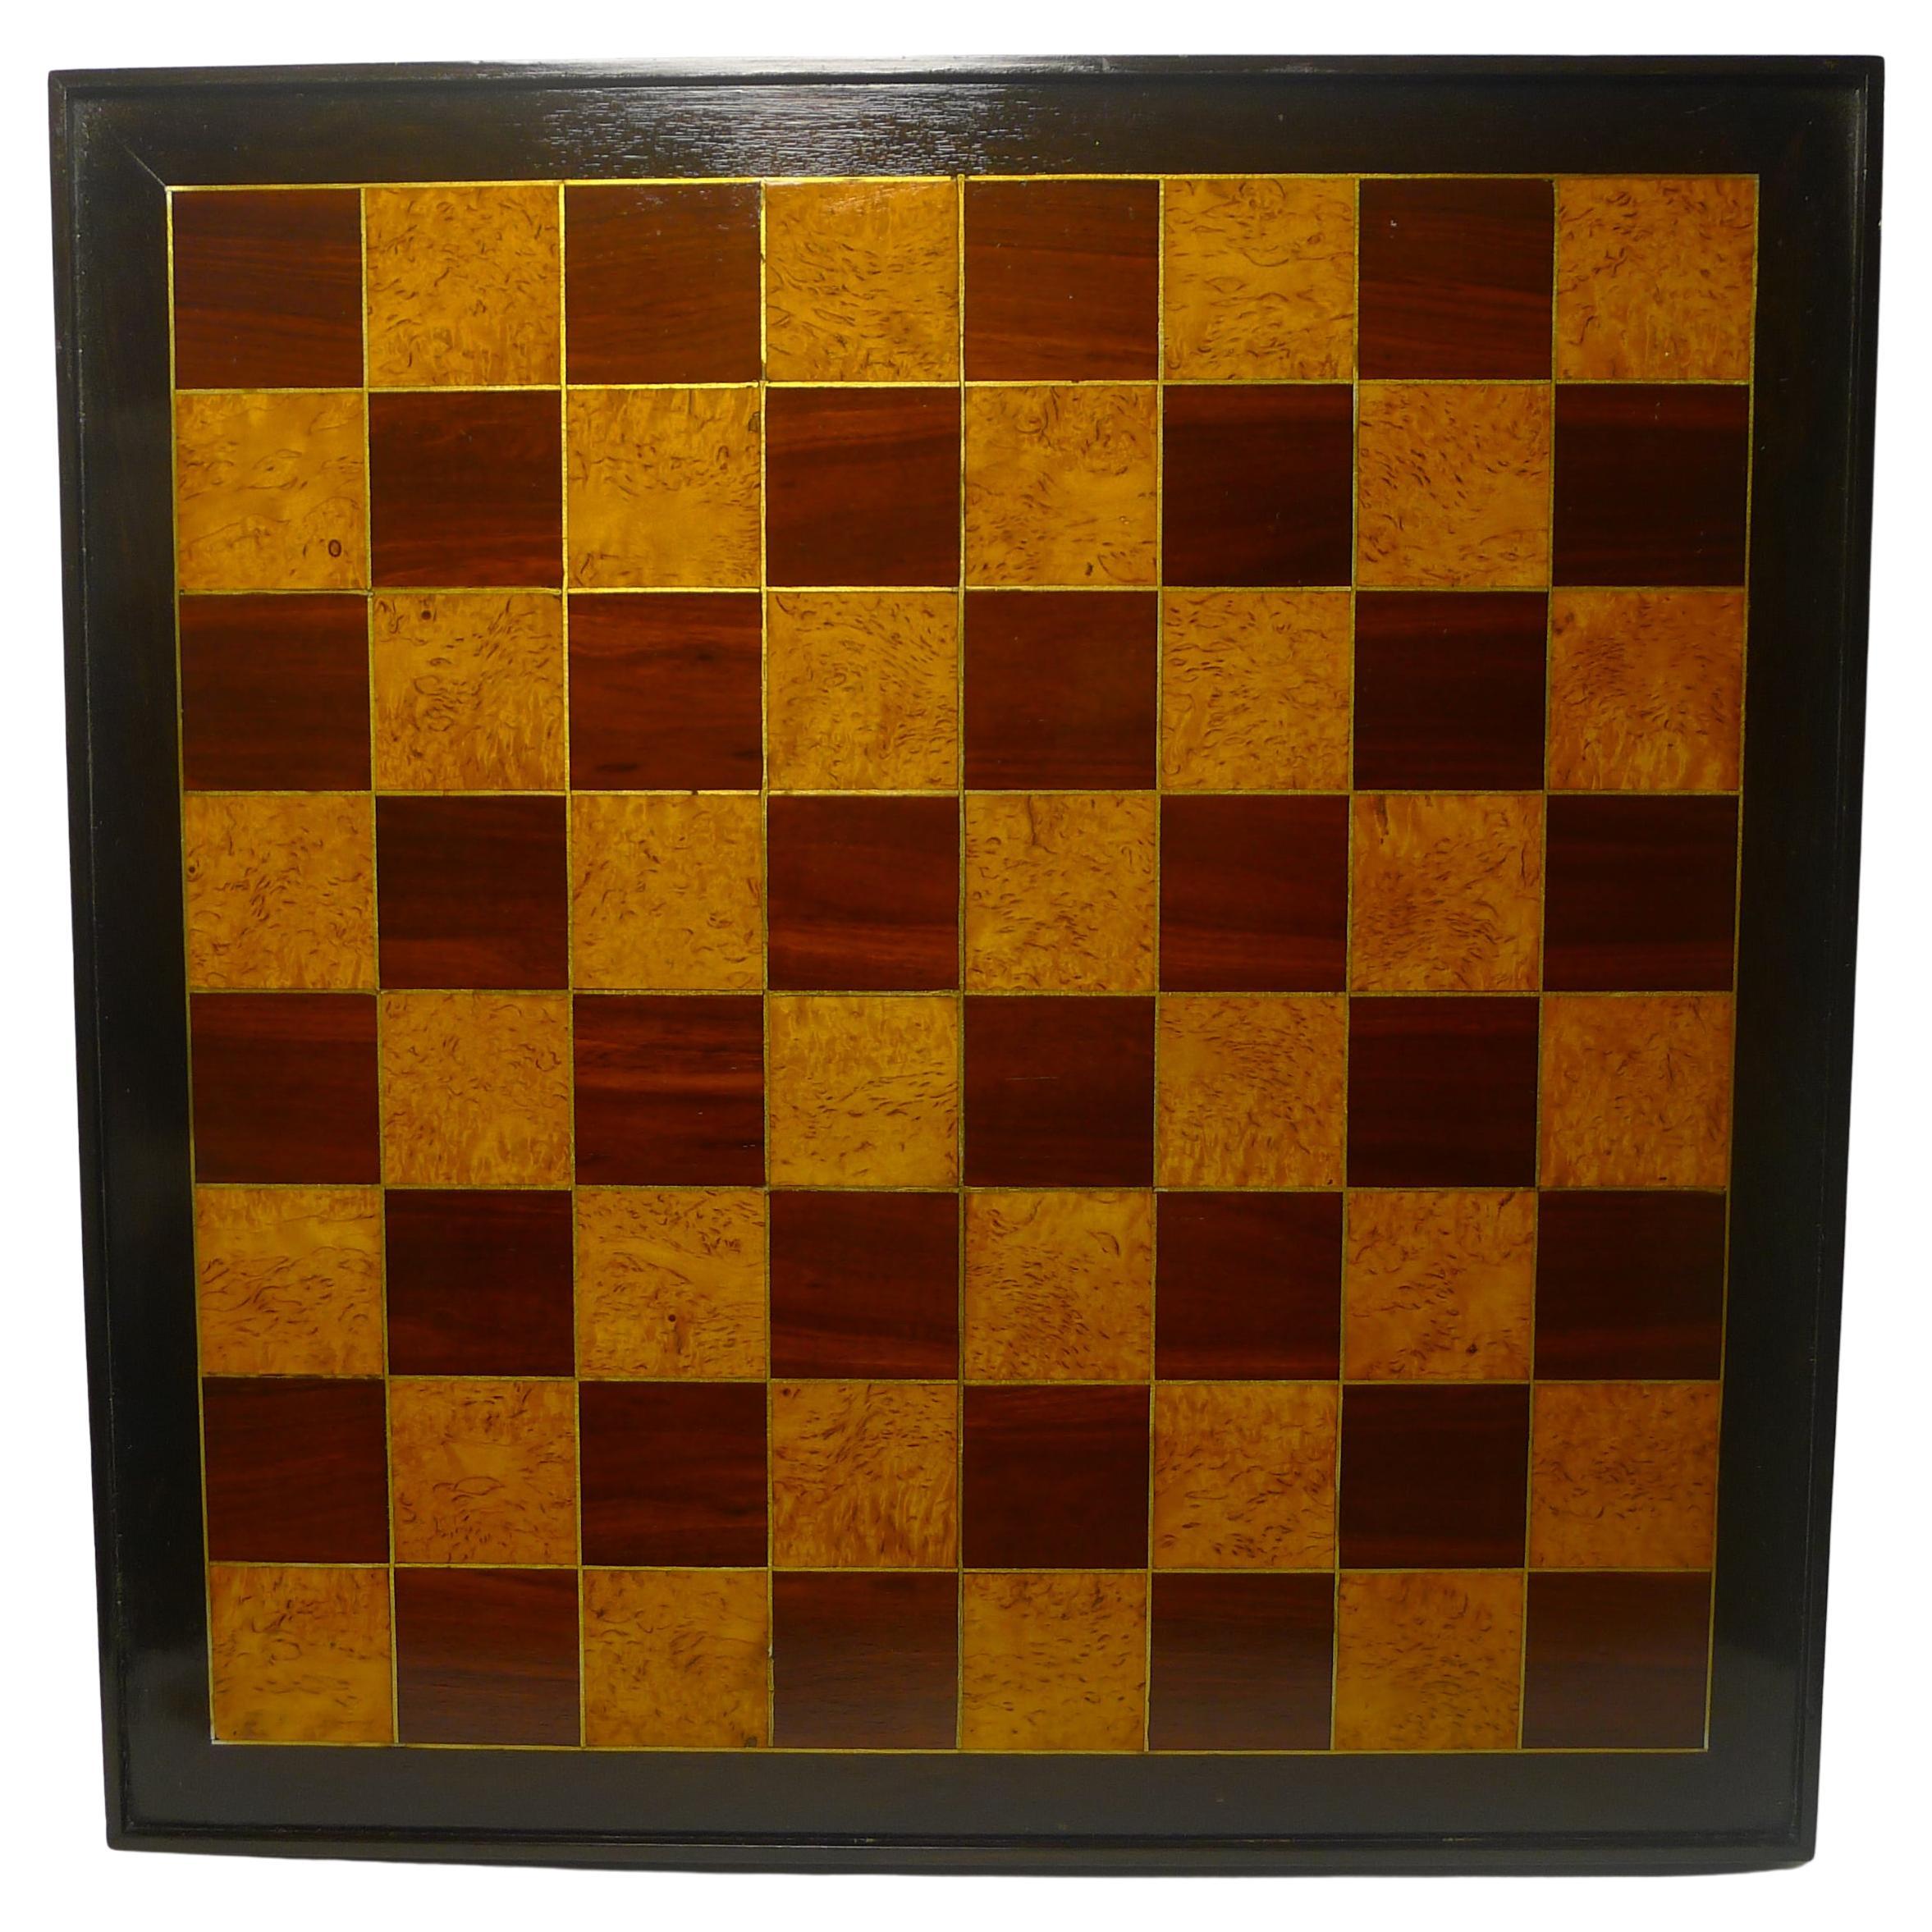 Large Wooden Chess Board, C.1890